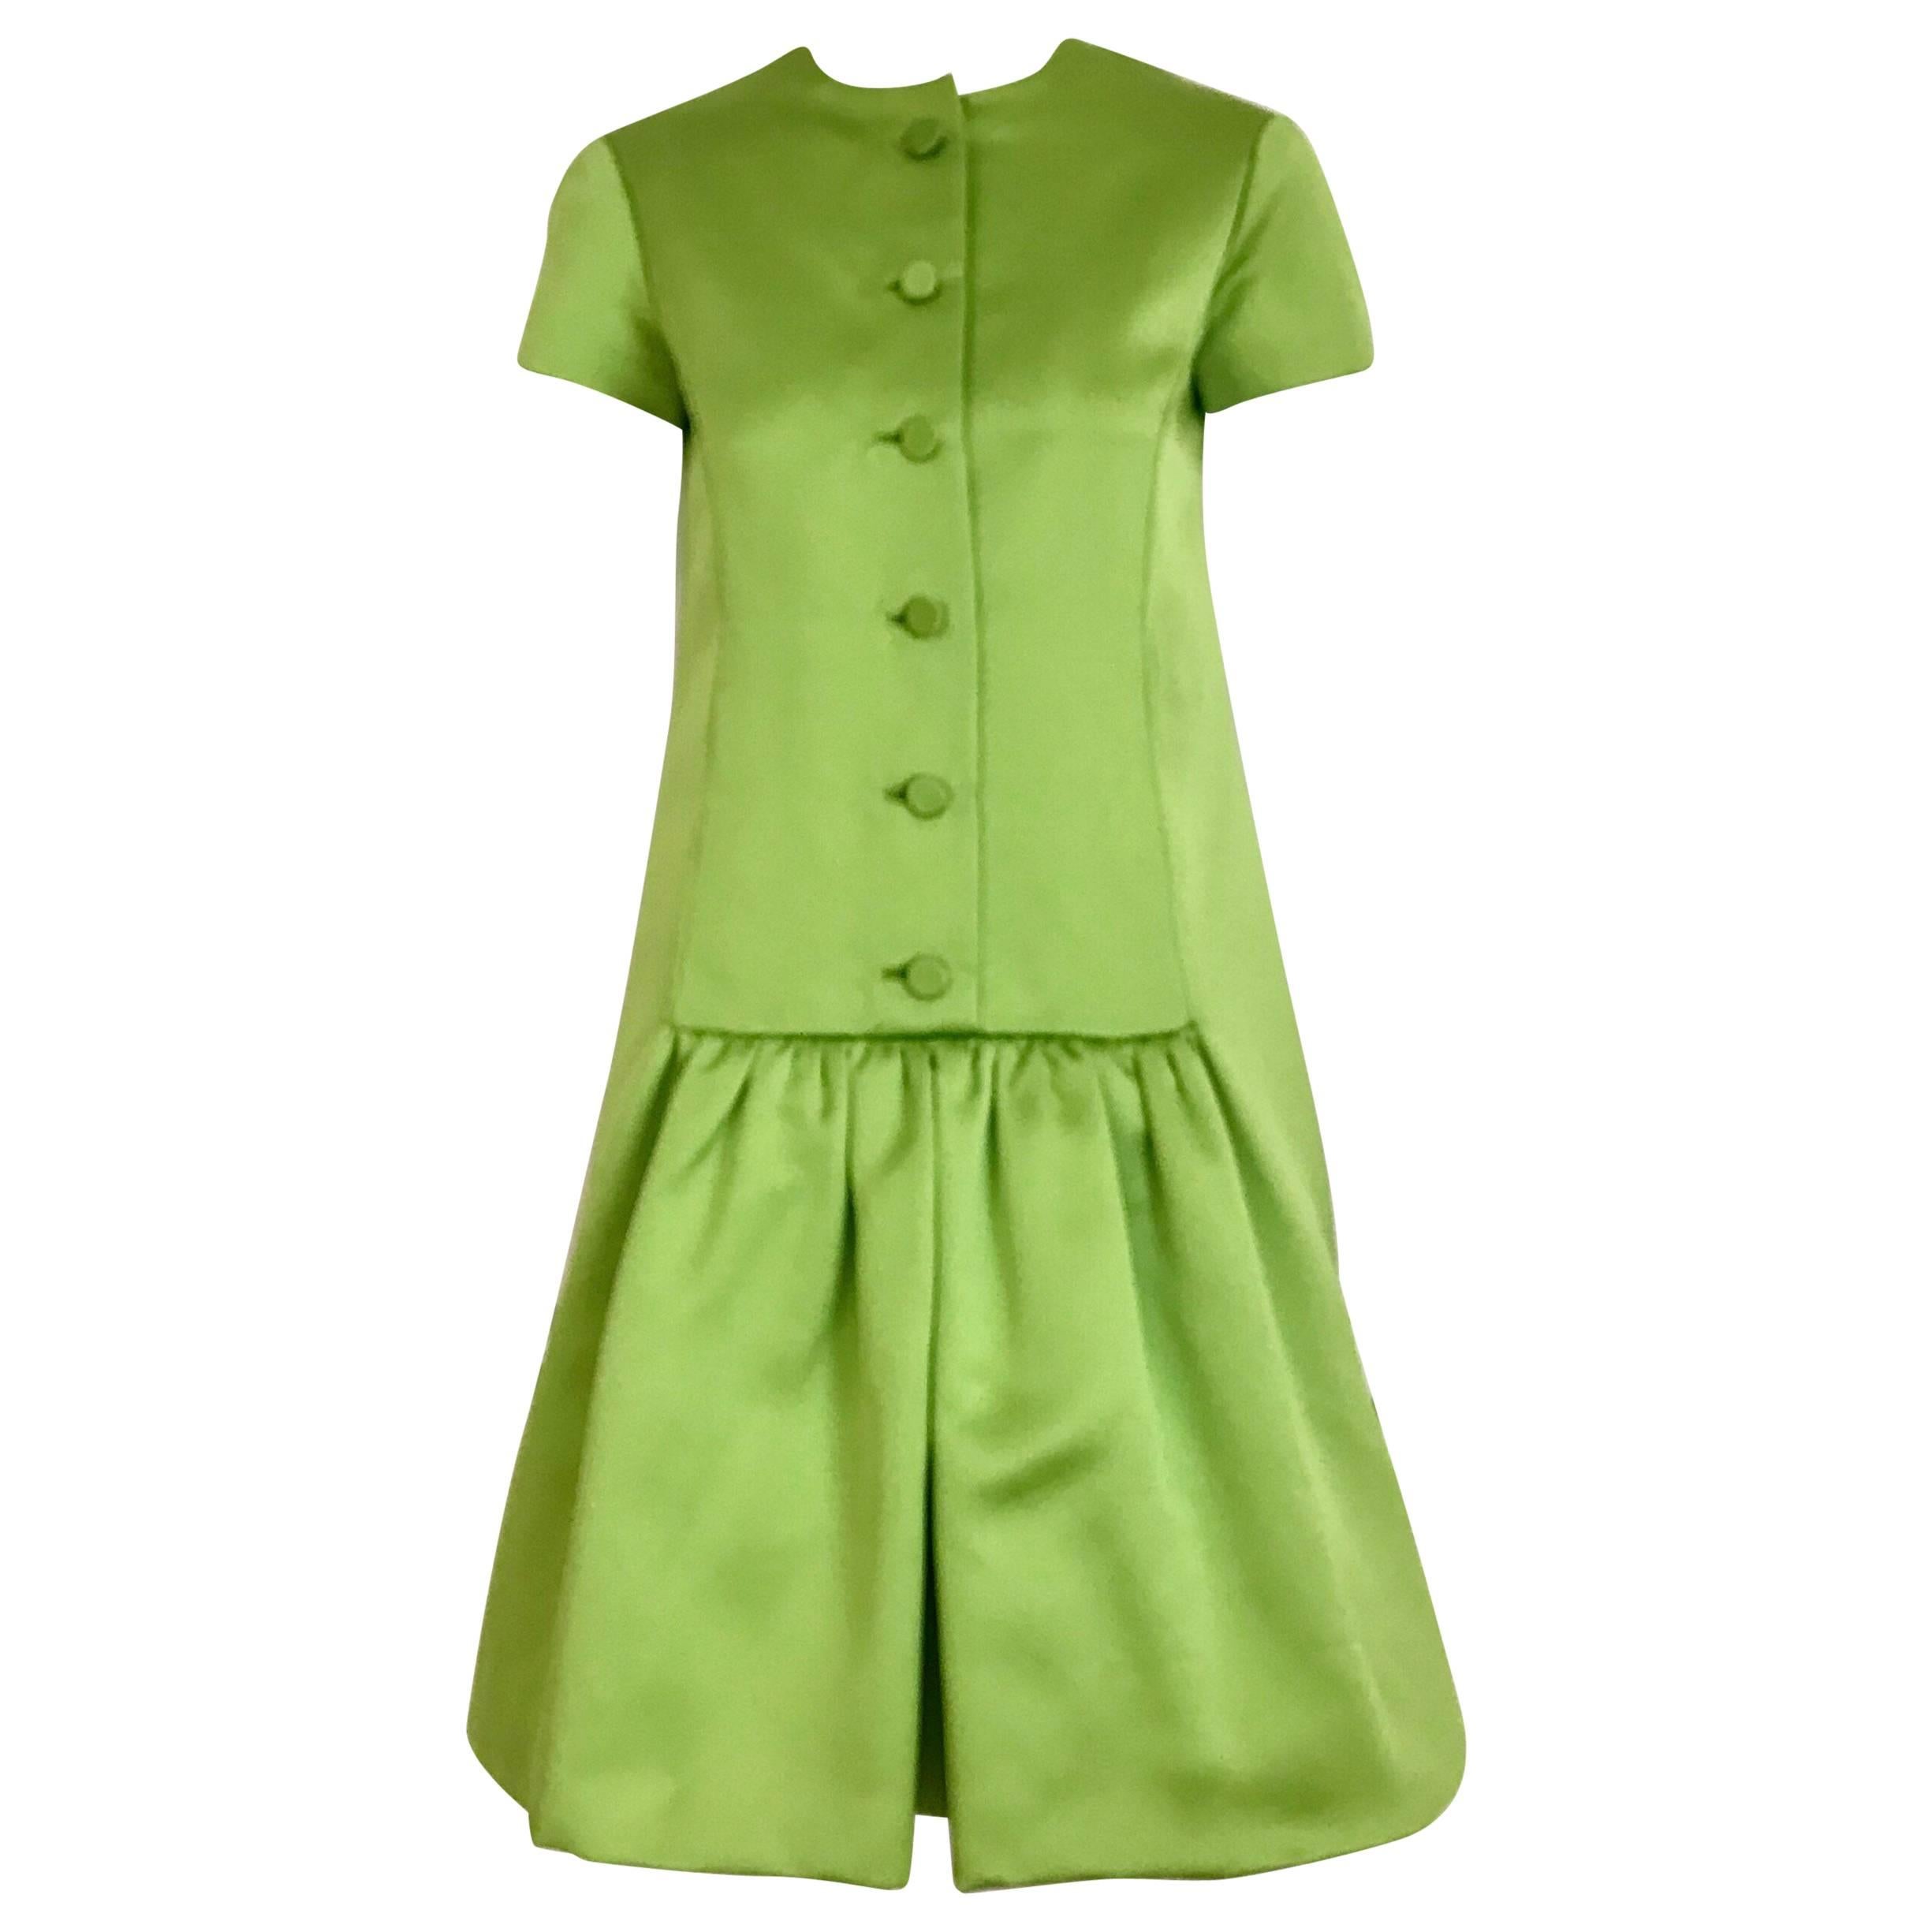 lime green cocktail dress